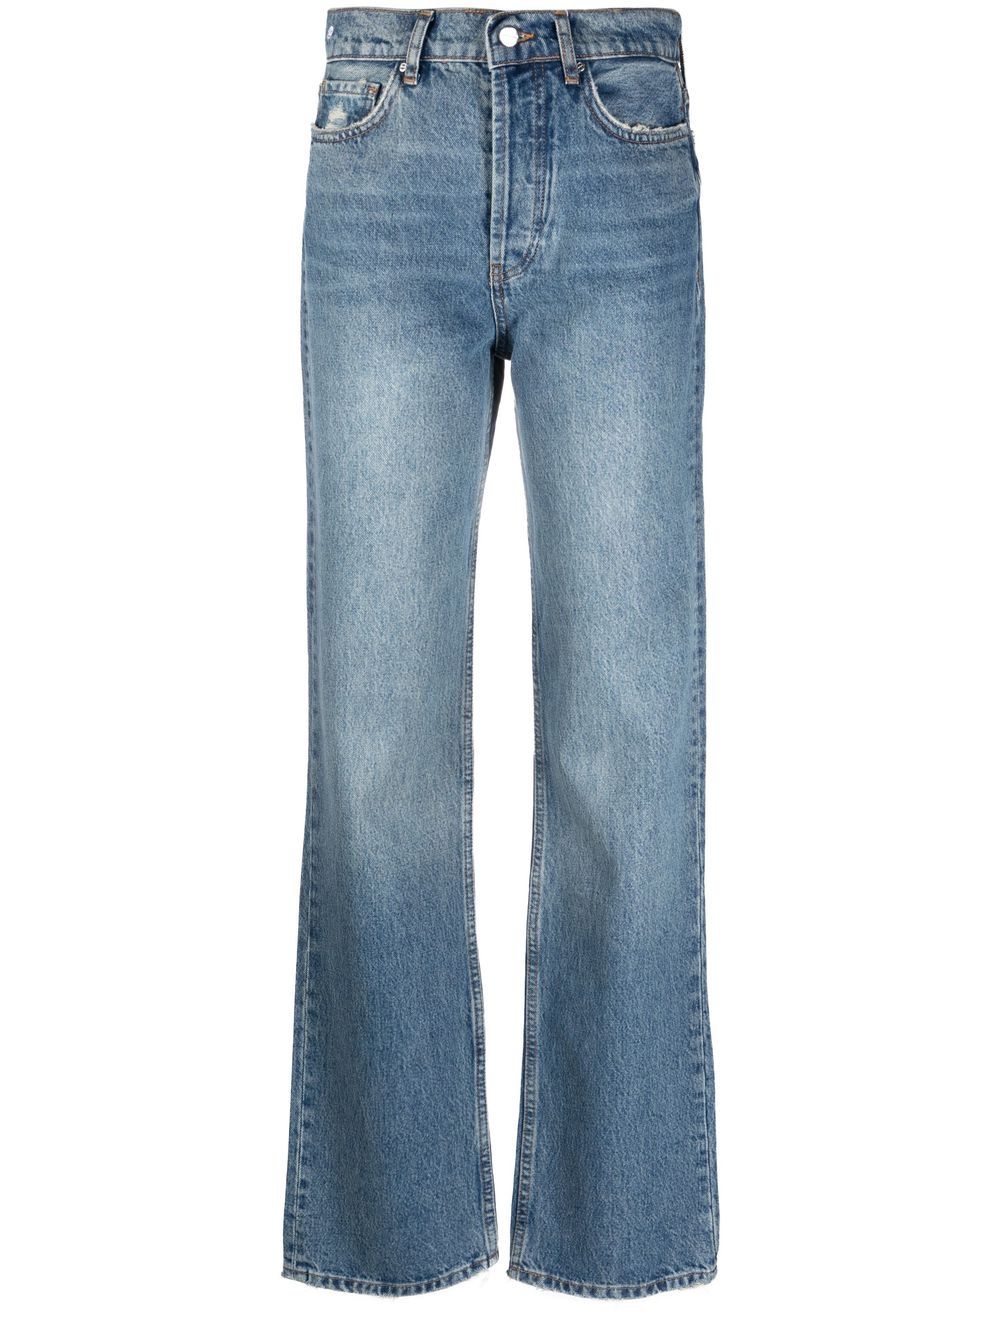 ANINE BING bootcut high-waisted jeans - Blue